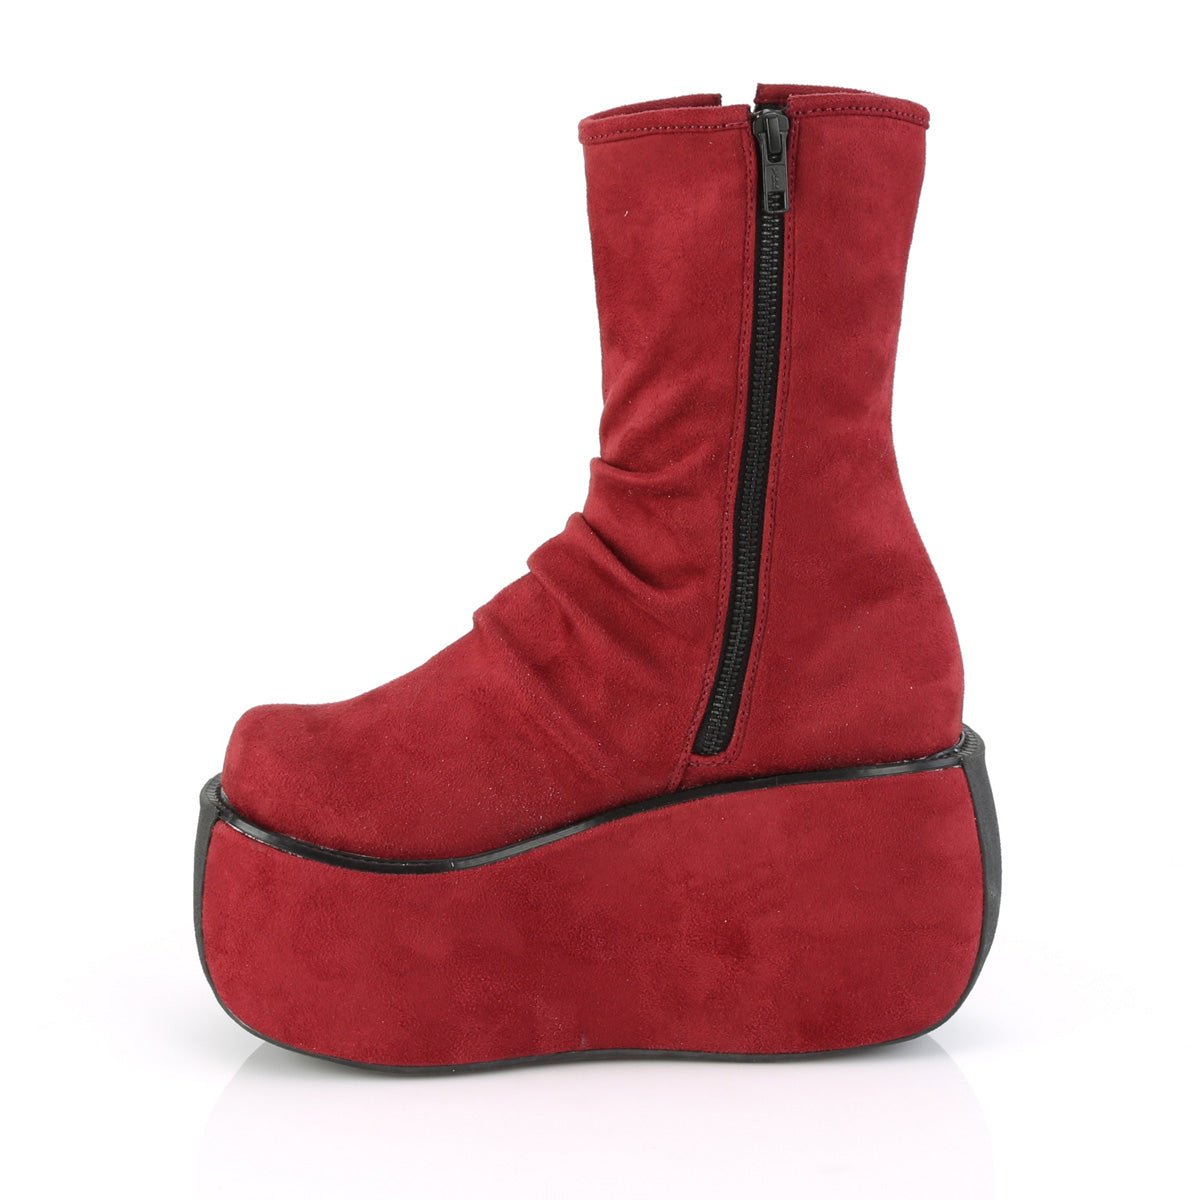 Too Fast | Demonia Violet 100 | Burgundy Faux Suede Women's Ankle Boots